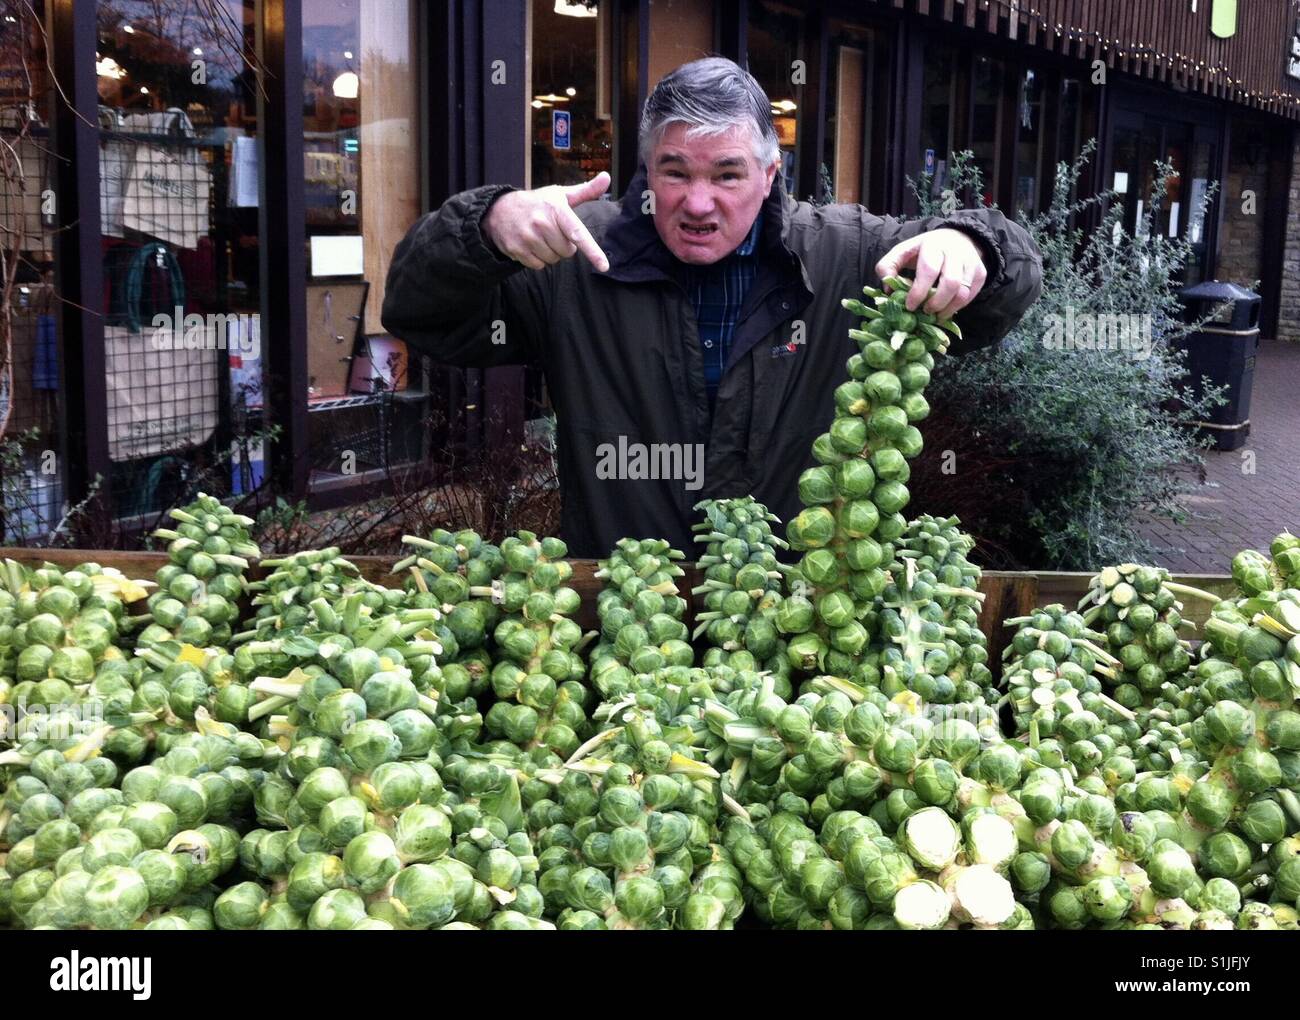 A man expresses his disgust at a display of Brussels Sprouts. Stock Photo